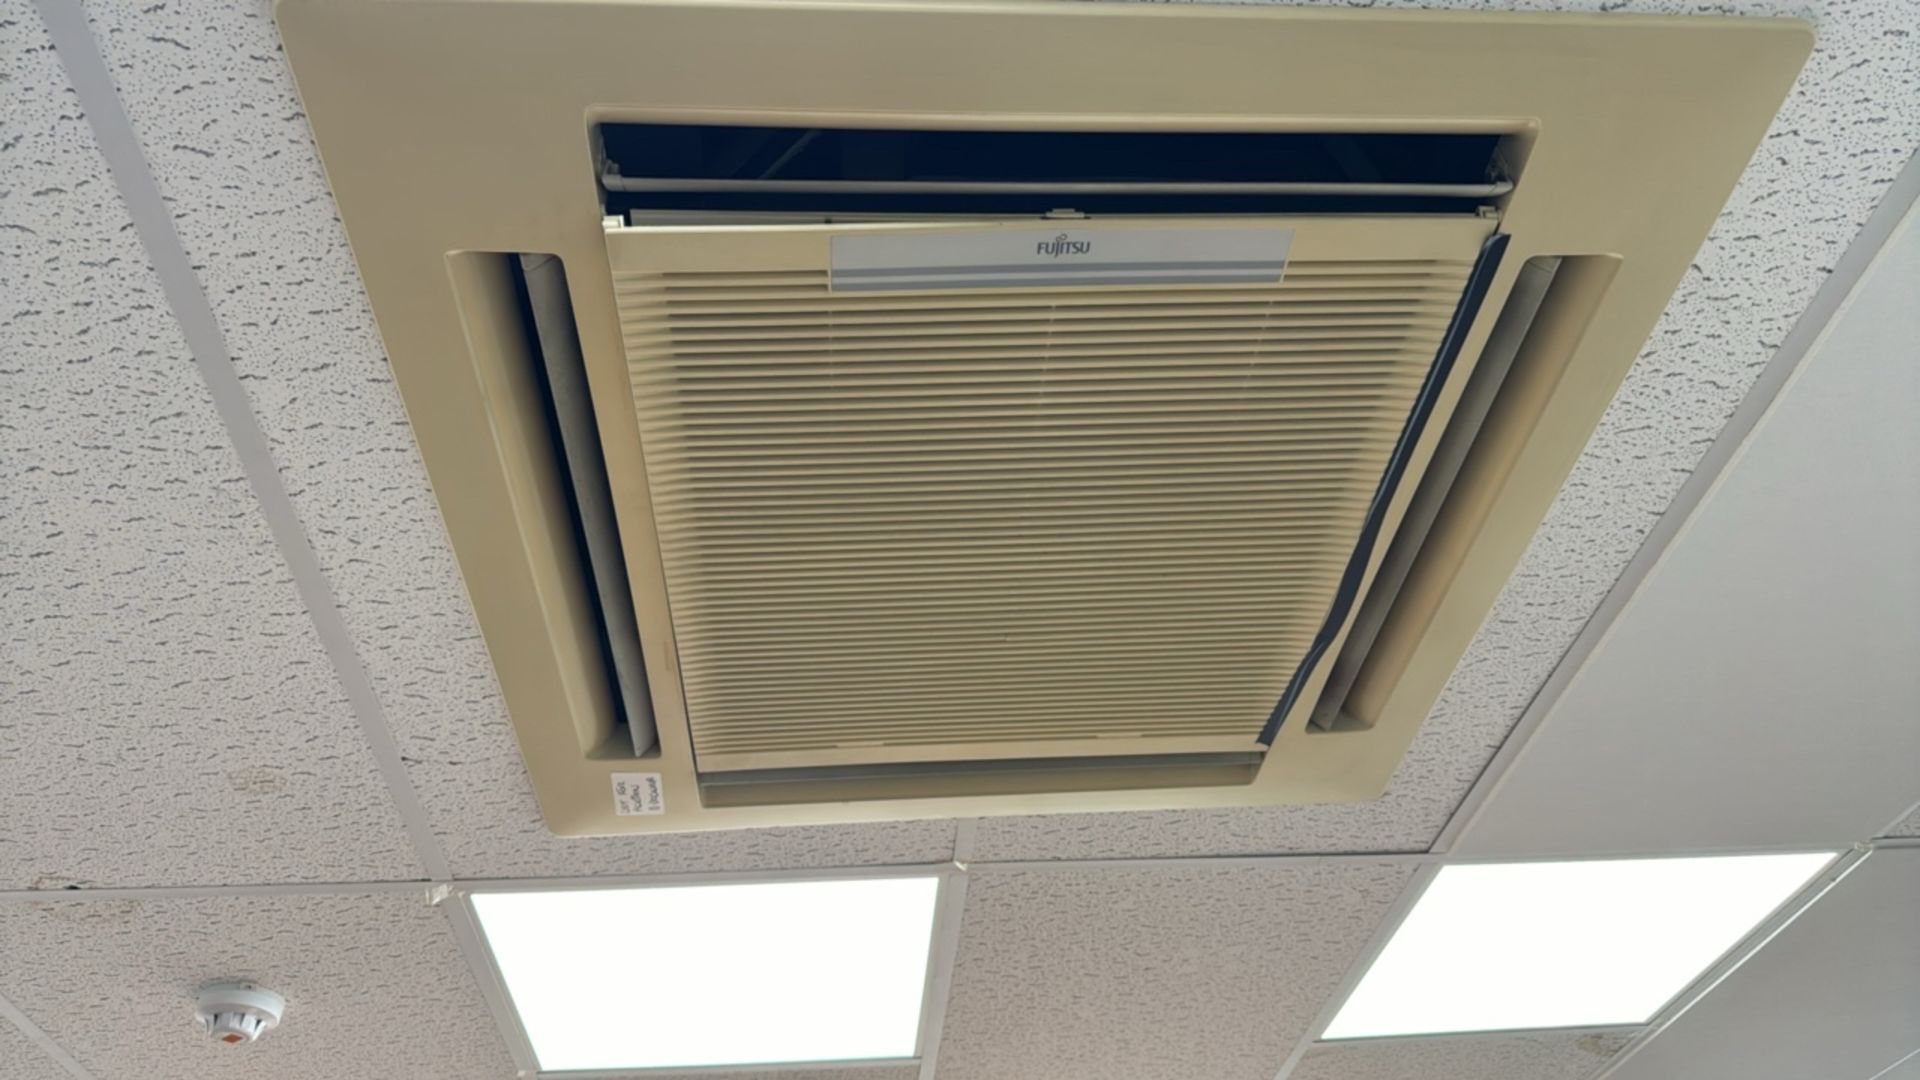 Fujitsu Air Conditioning Ceiling Cassette - Image 3 of 5